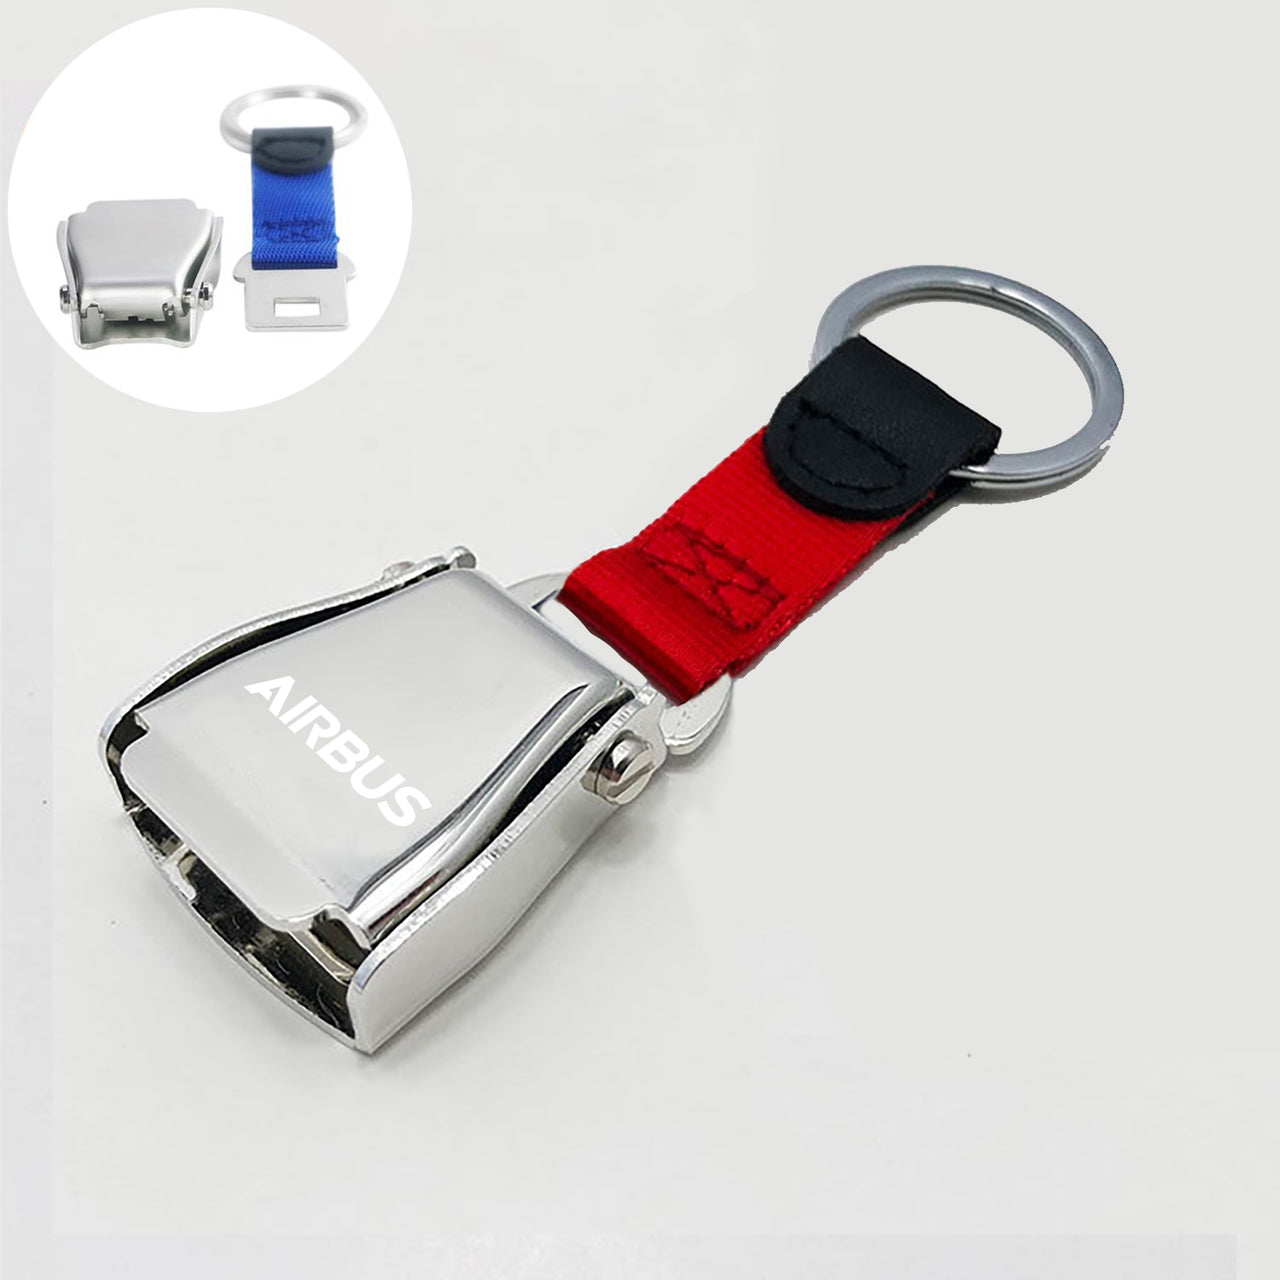 Airbus & Text Designed Airplane Seat Belt Key Chains